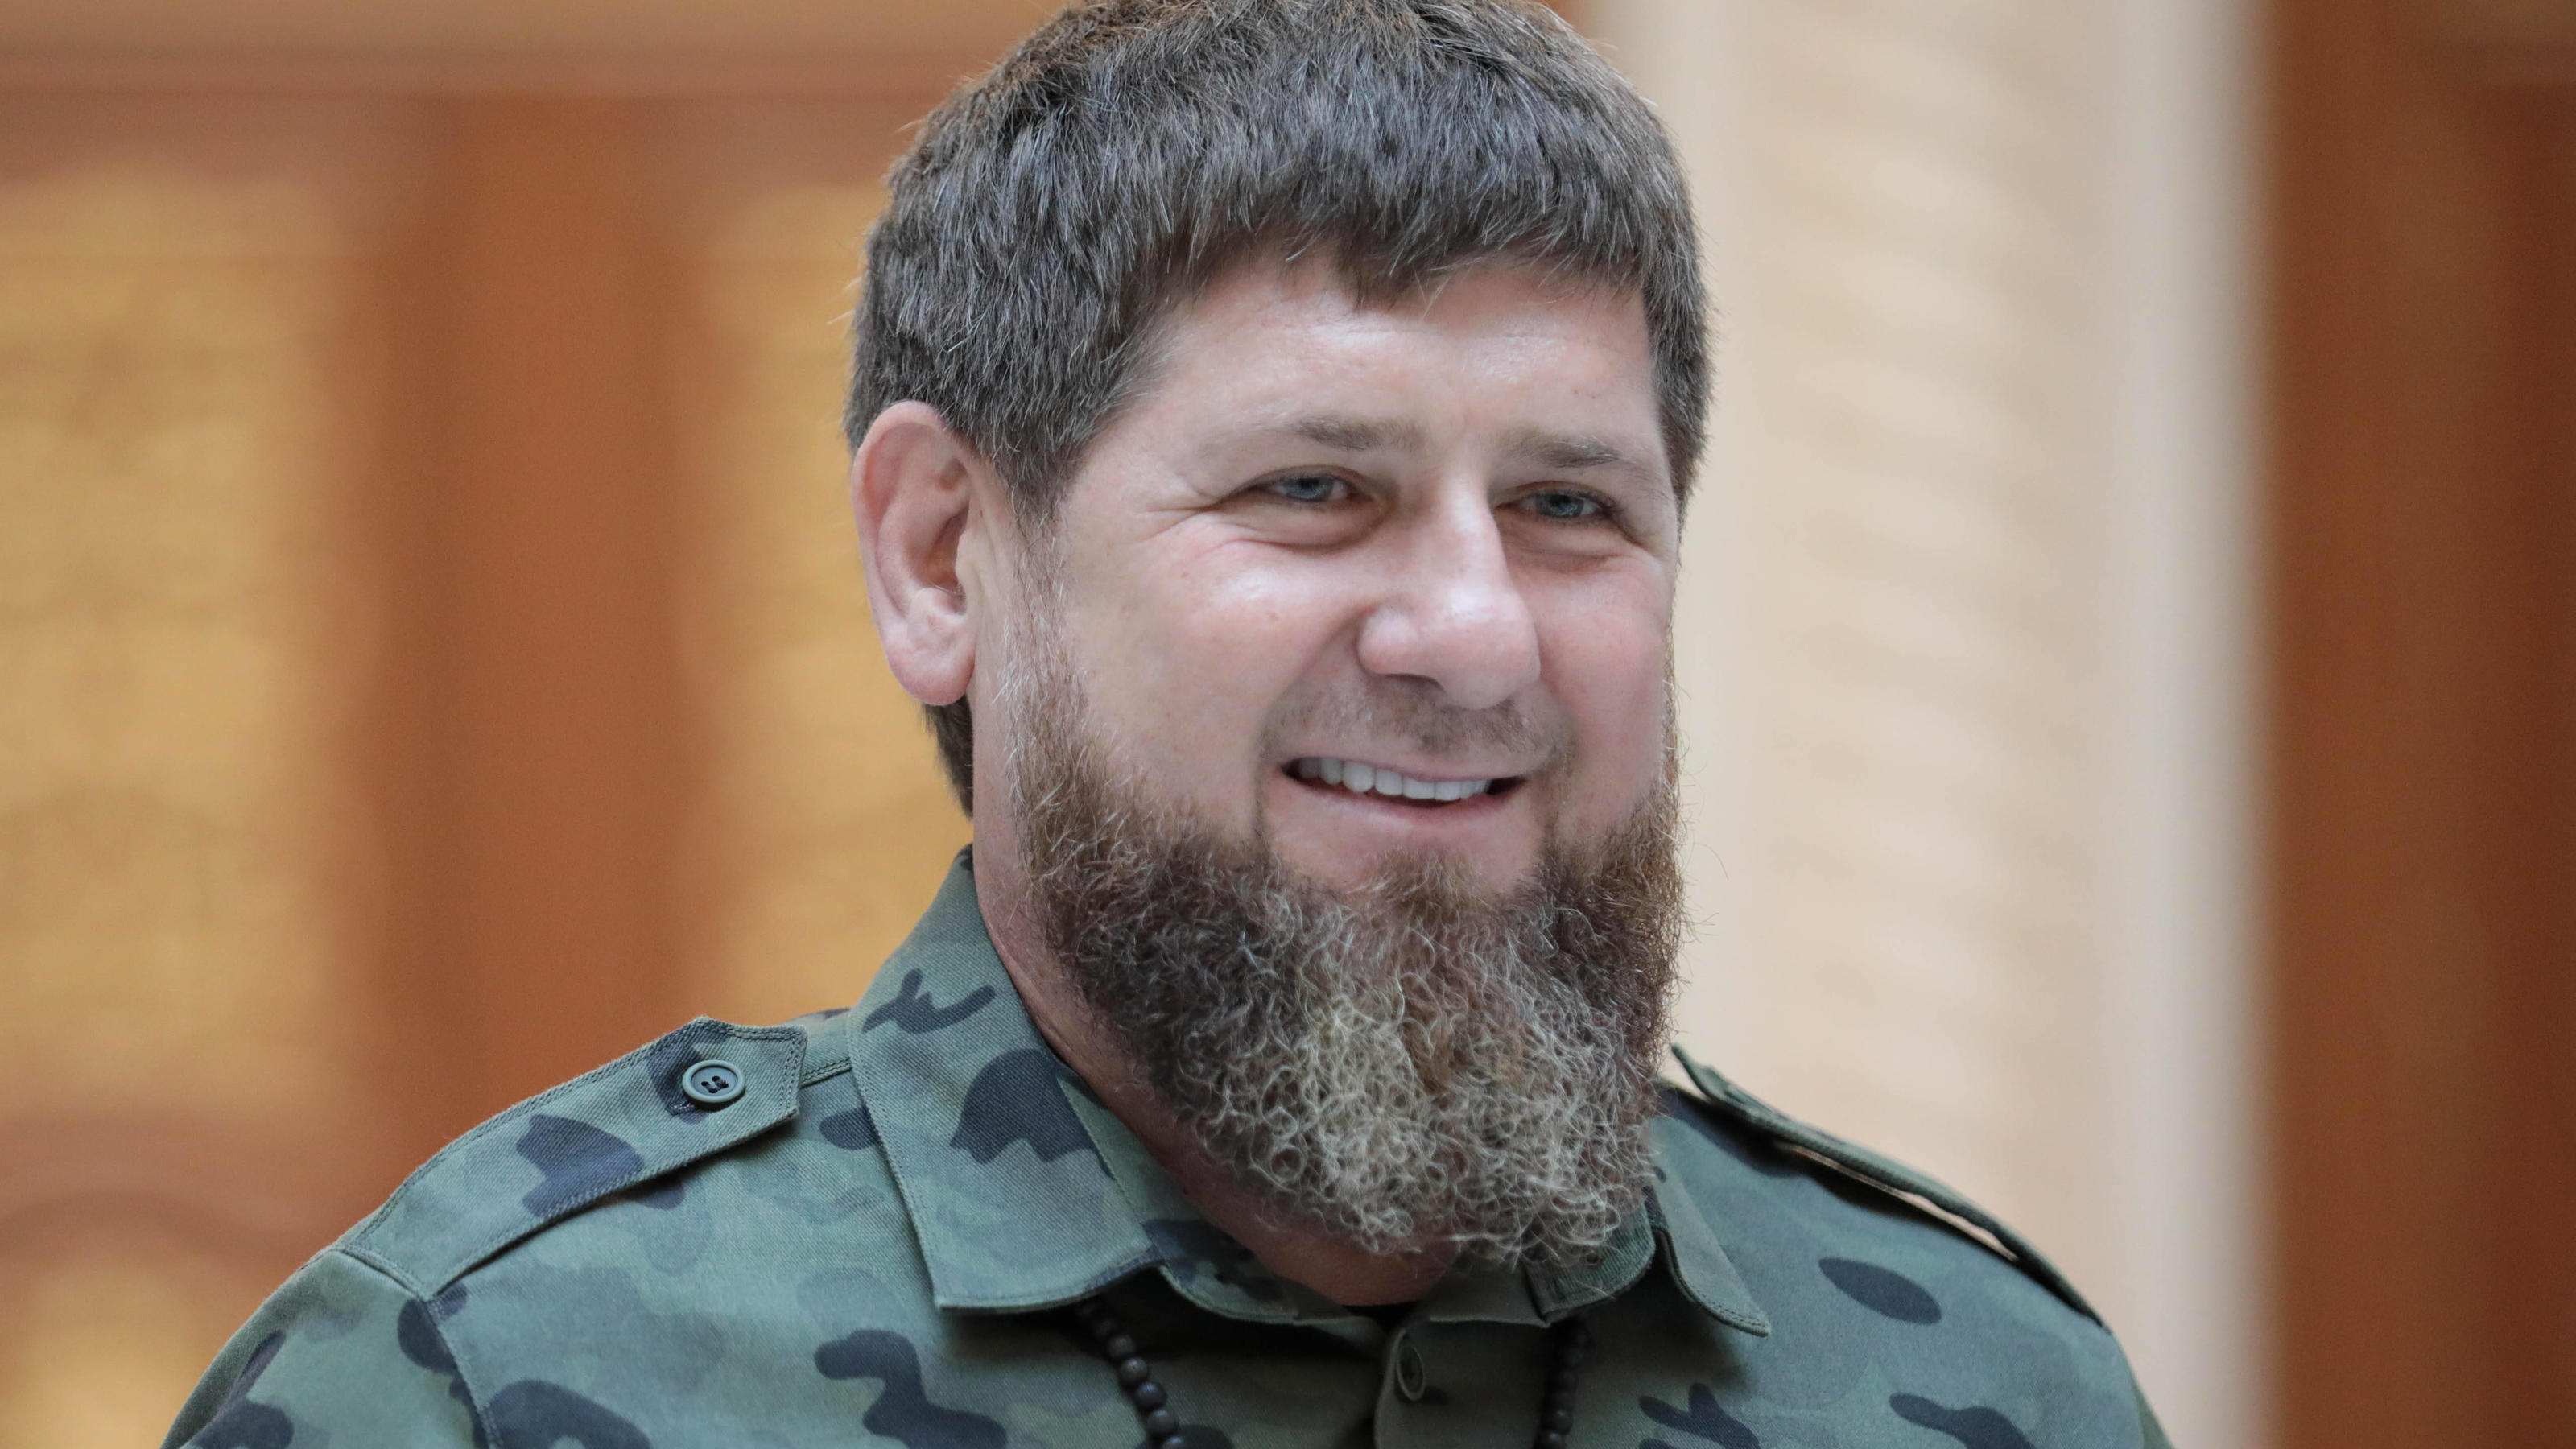  GROZNY, RUSSIA - SEPTEMBER 22, 2021: Chechen leader Ramzan Kadyrov attends a ceremony to present government awards to officers of the Chechen branch of the Russian Federal National Guard Service Rosgvardia. Yelena Afonina/TASS PUBLICATIONxINxGERxAUT